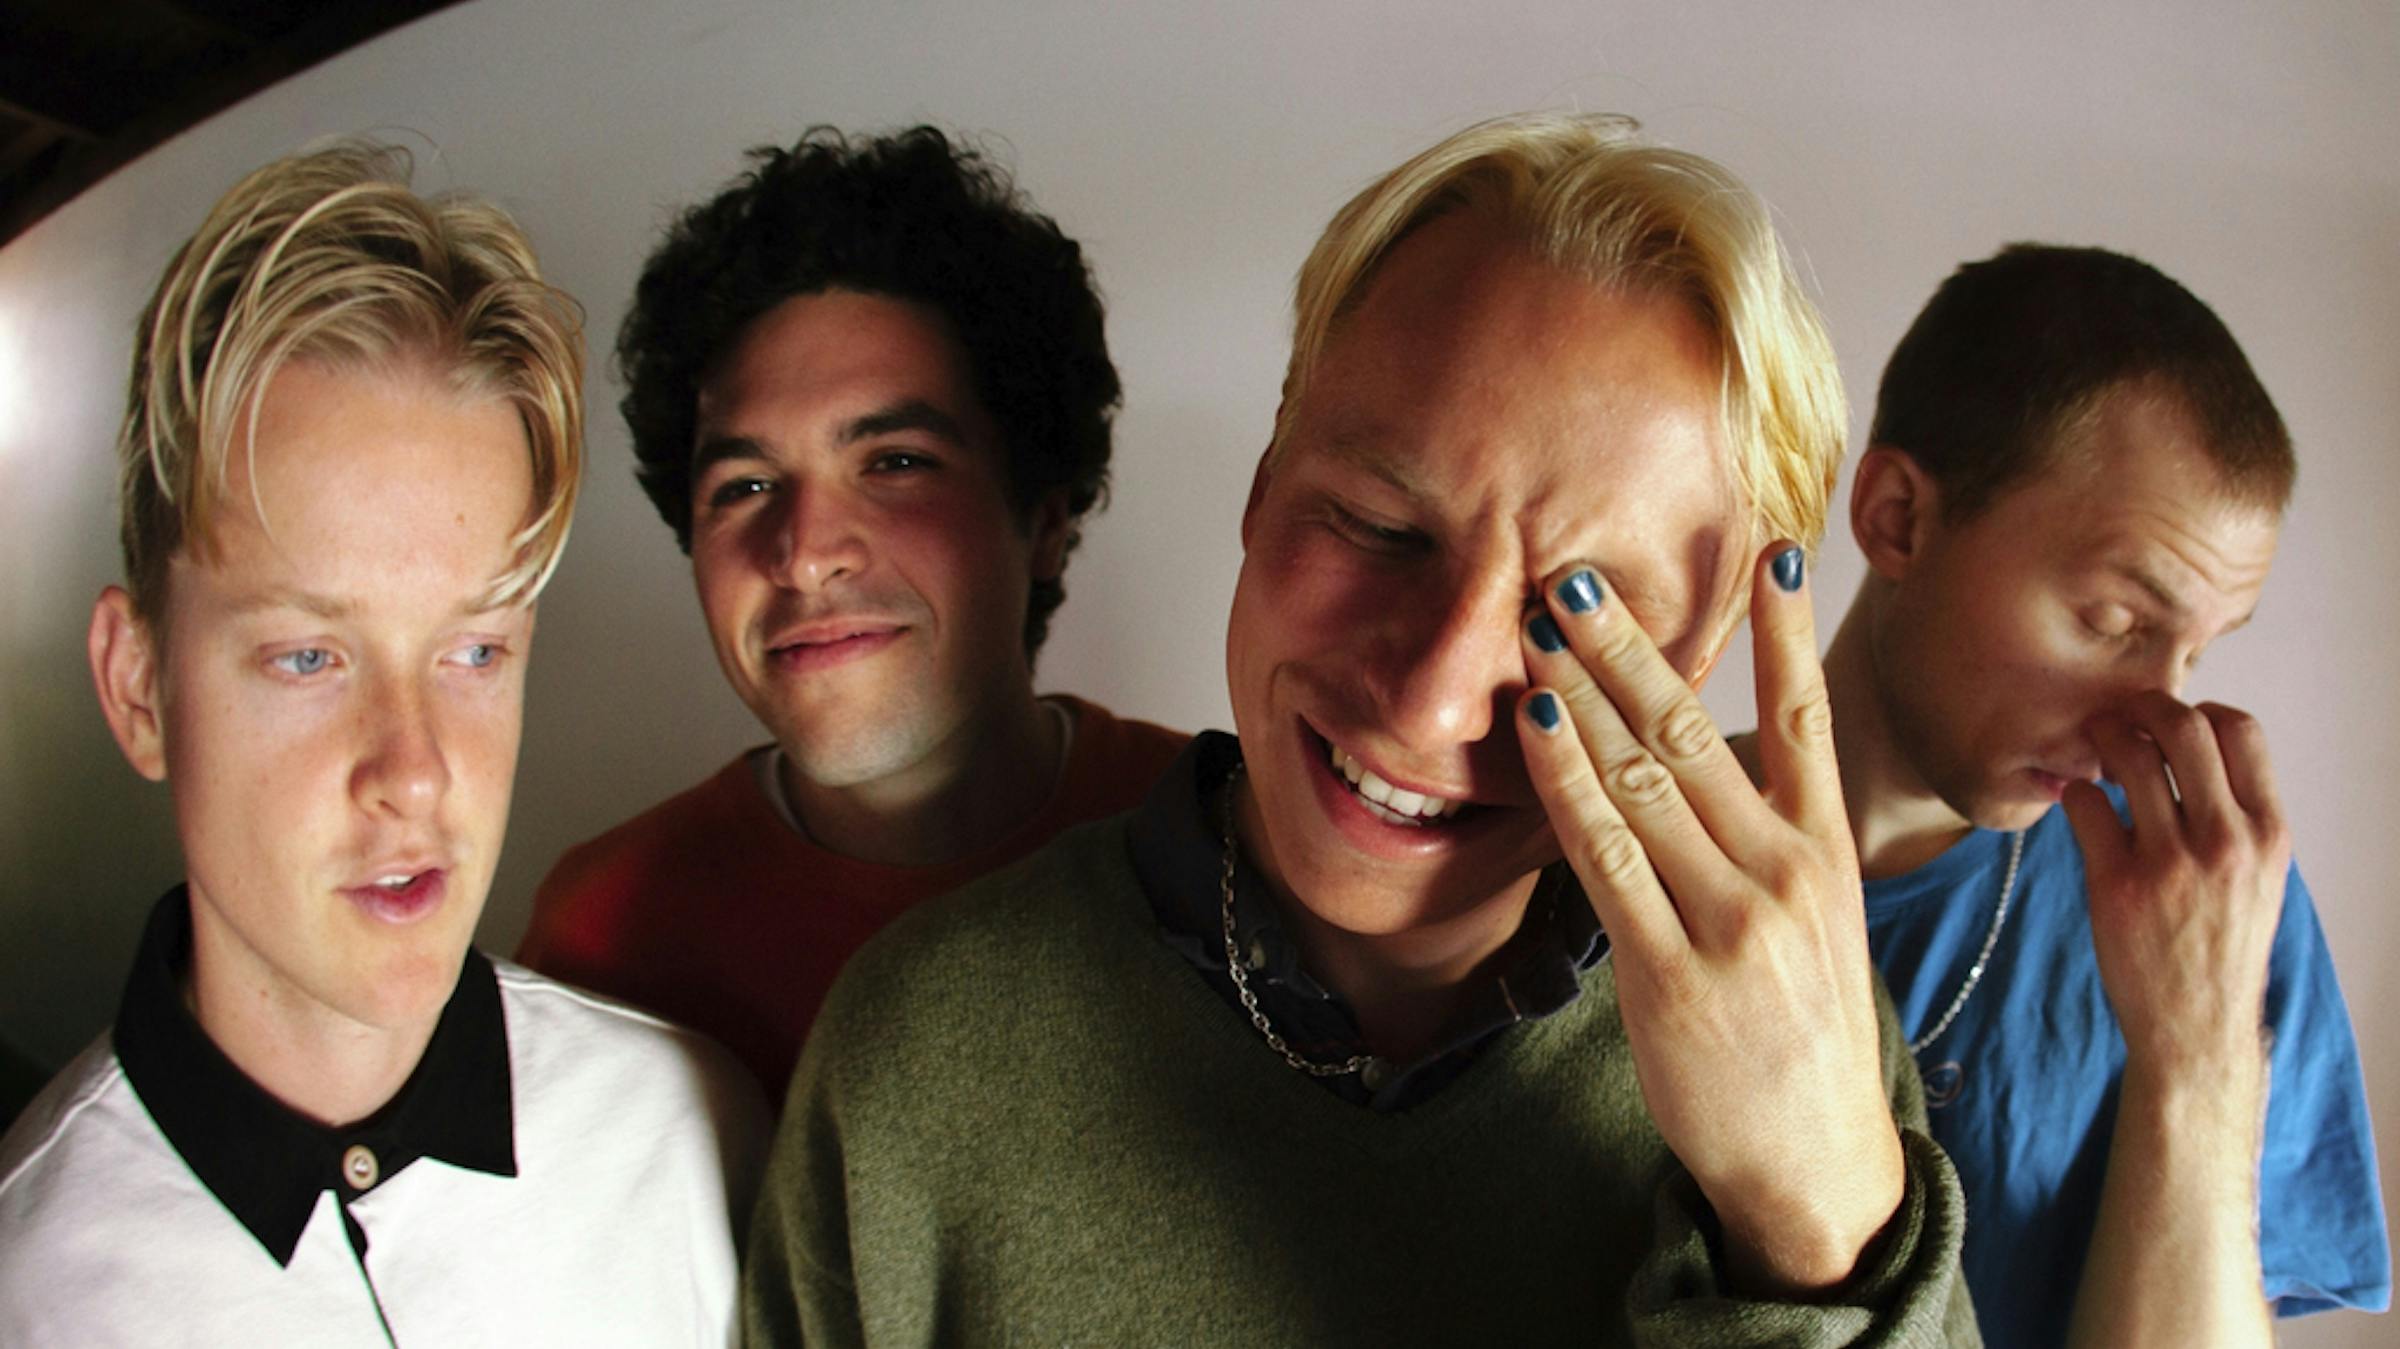 SWMRS Cancel All Remaining 2019 Tour Dates Following Van Accident